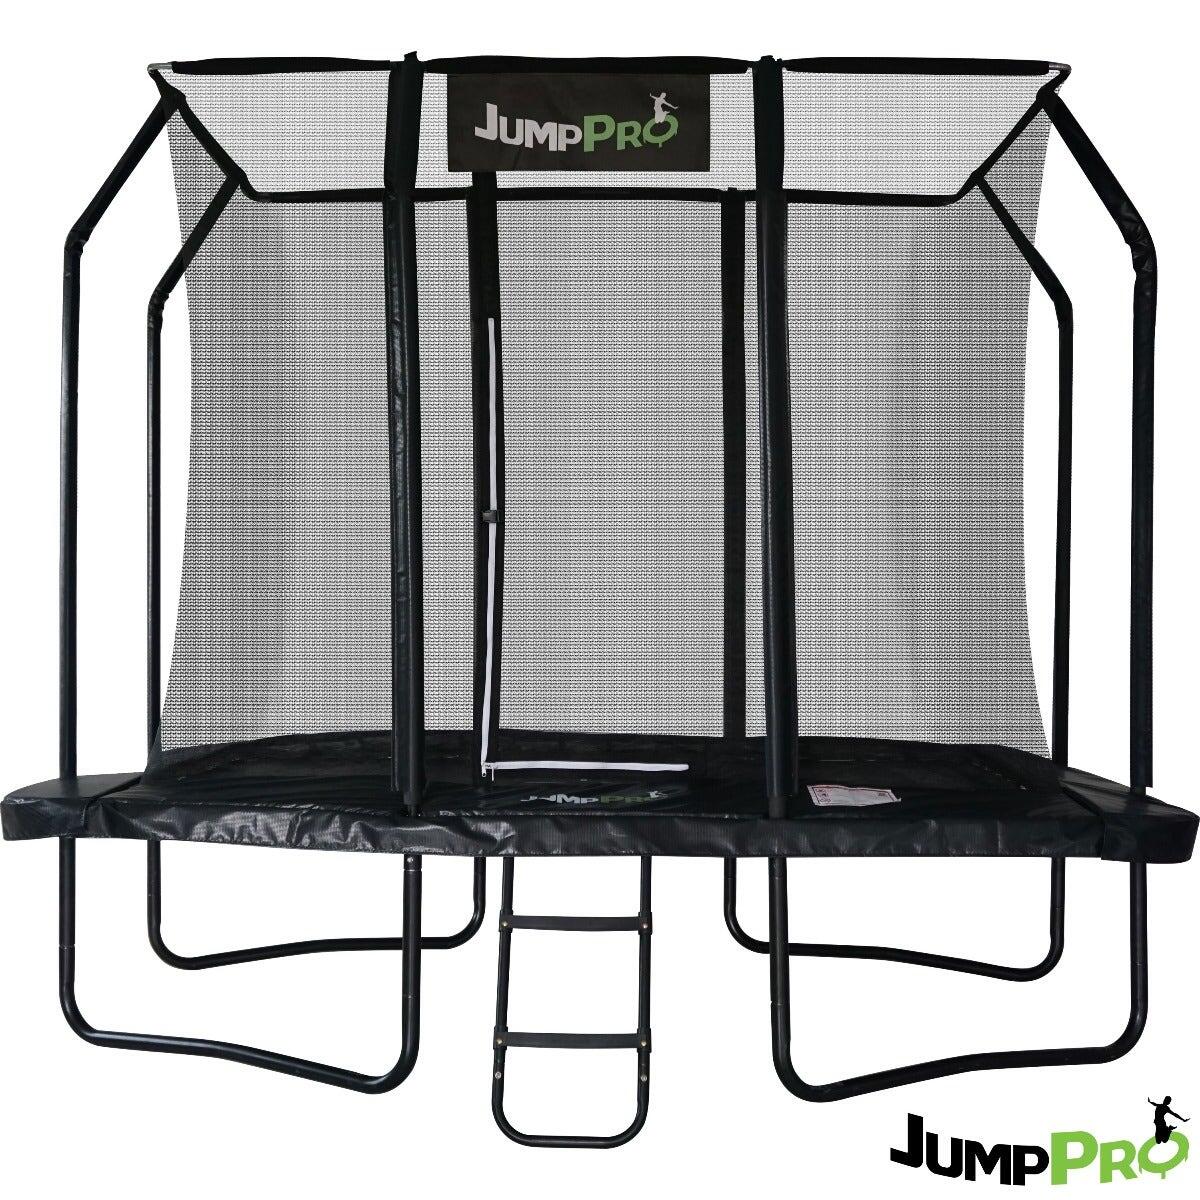 JUMPPRO 12ft x 8ft JumpPRO™ Xcel Black Rectangular Trampoline with Enclosure